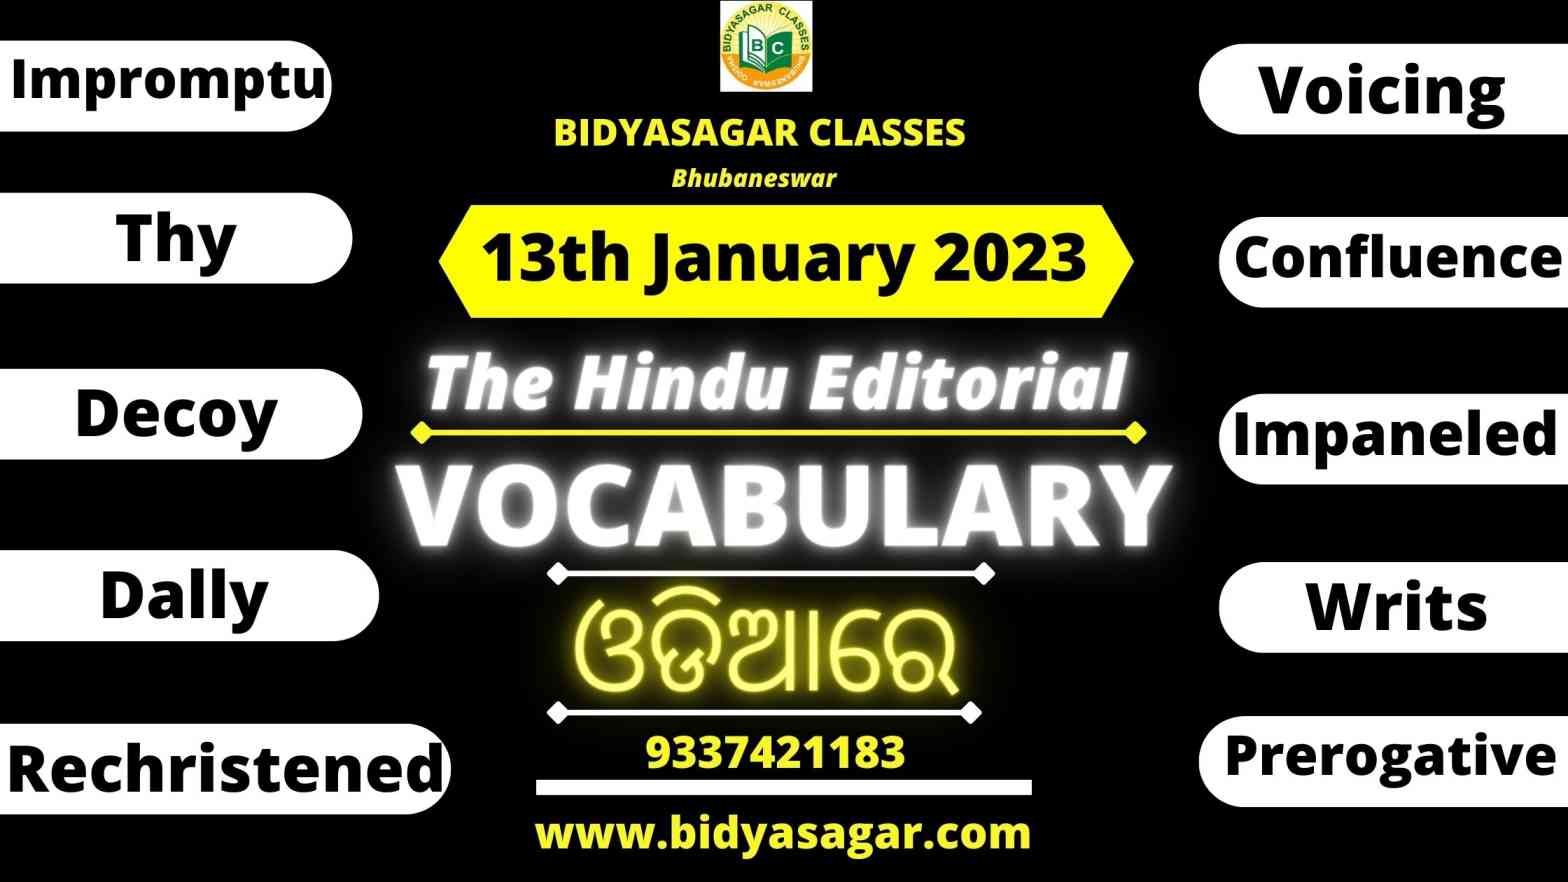 The Hindu Editorial Vocabulary of 13th January 2023